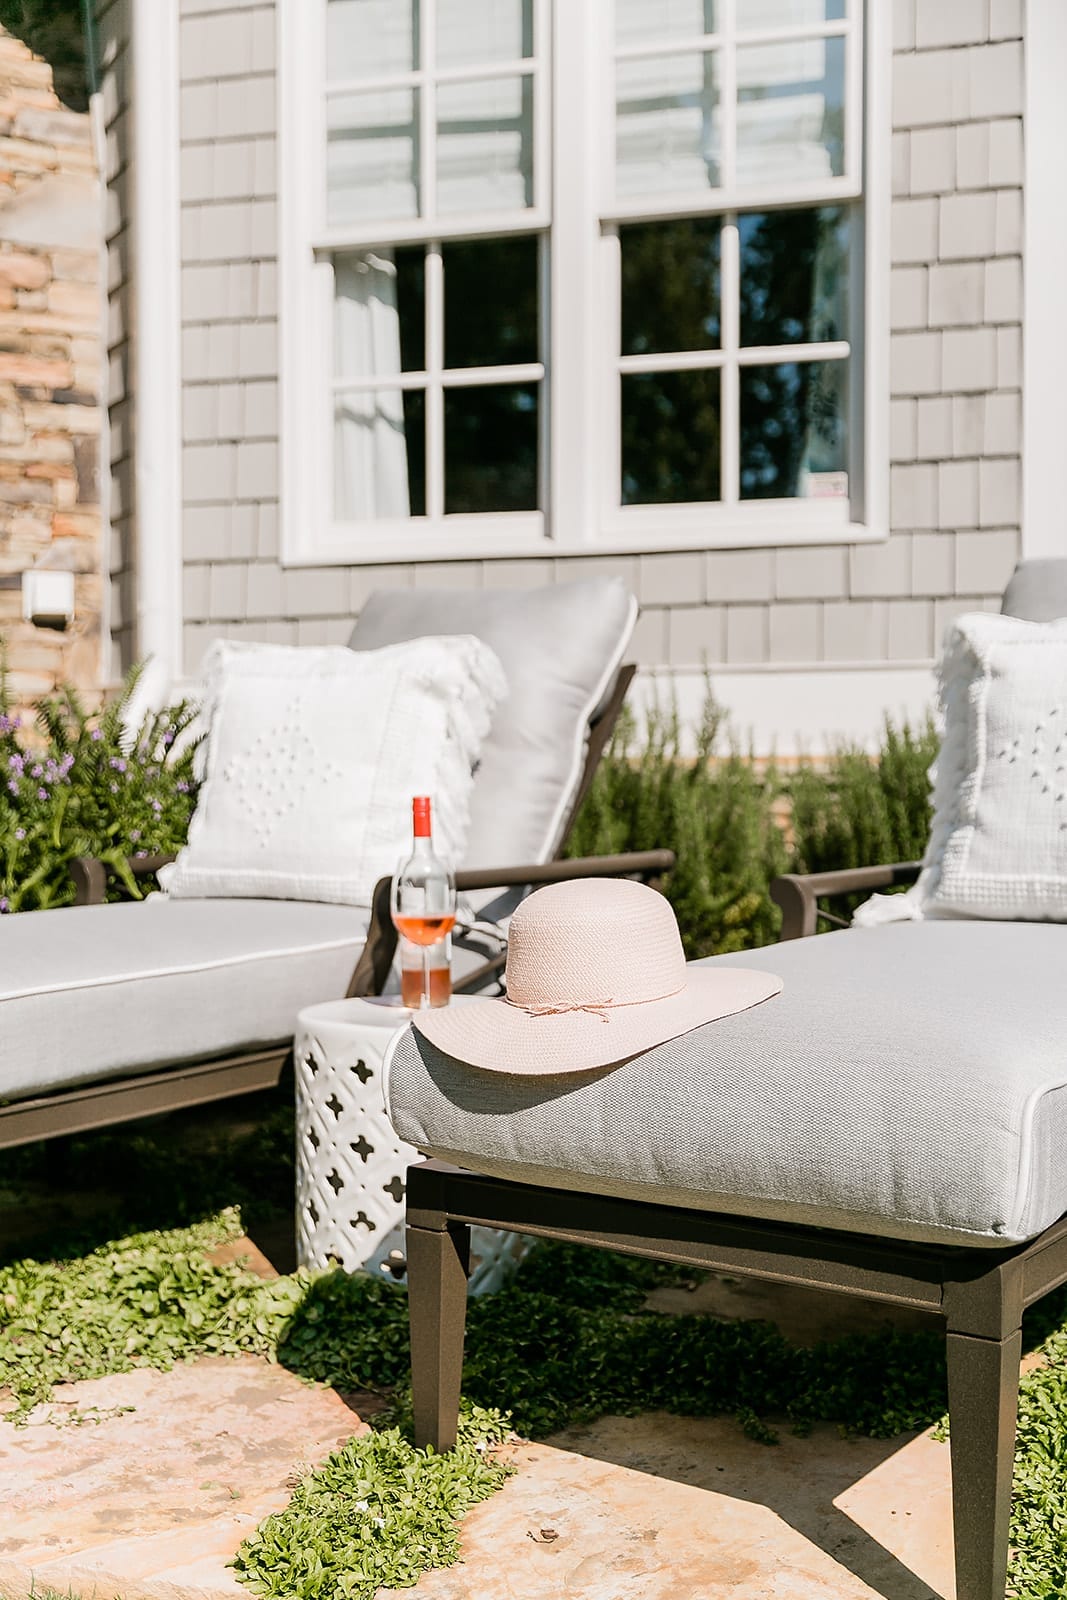 Comfy oversized chaise lounge chairs. Cedar house exterior Cape Cod style with gray outdoor furniture and white garden stool.